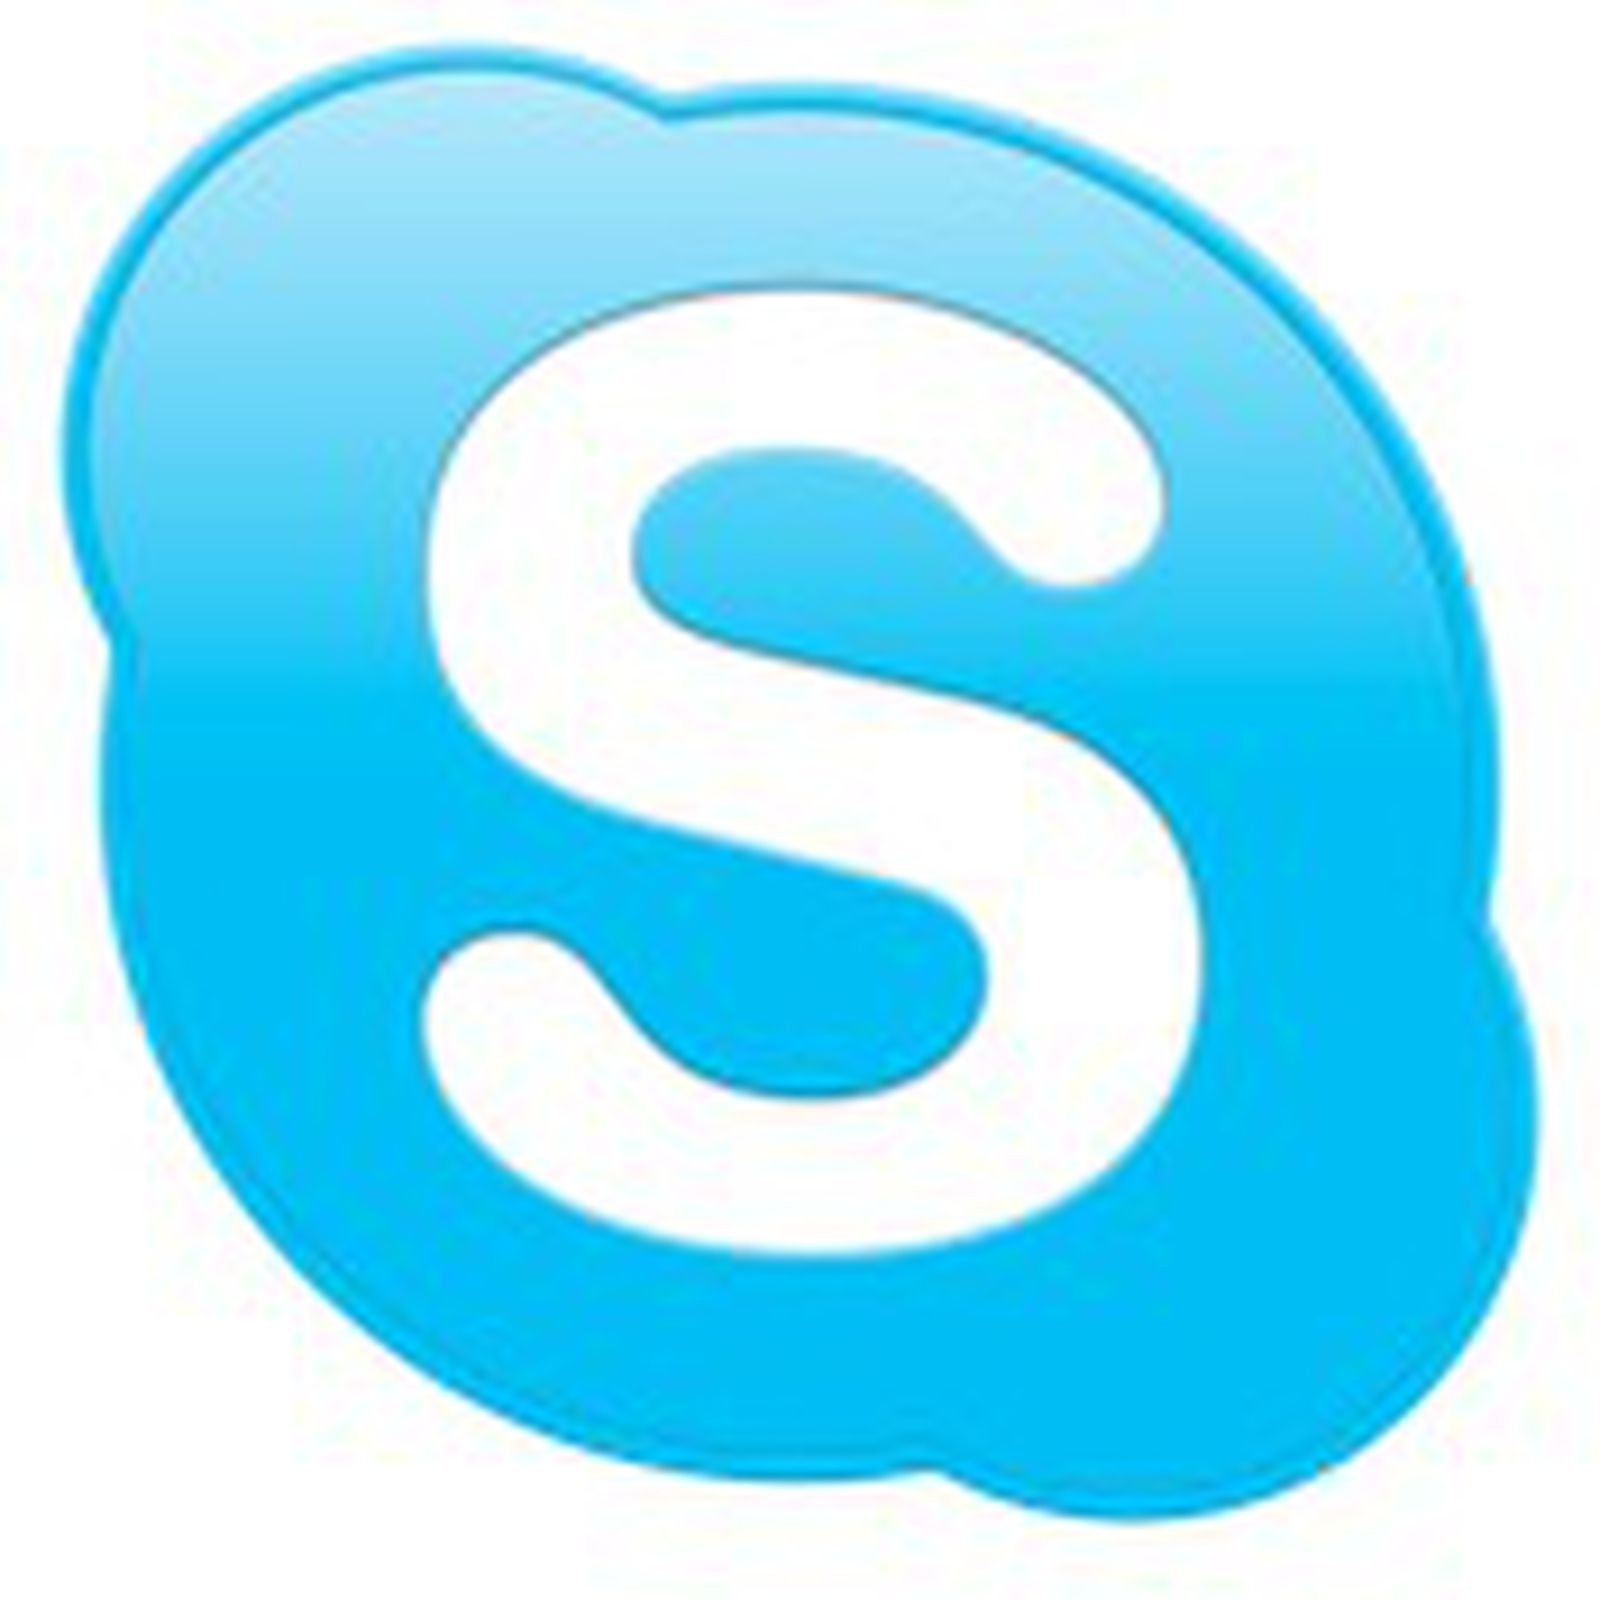 download the last version for mac Skype 8.101.0.212